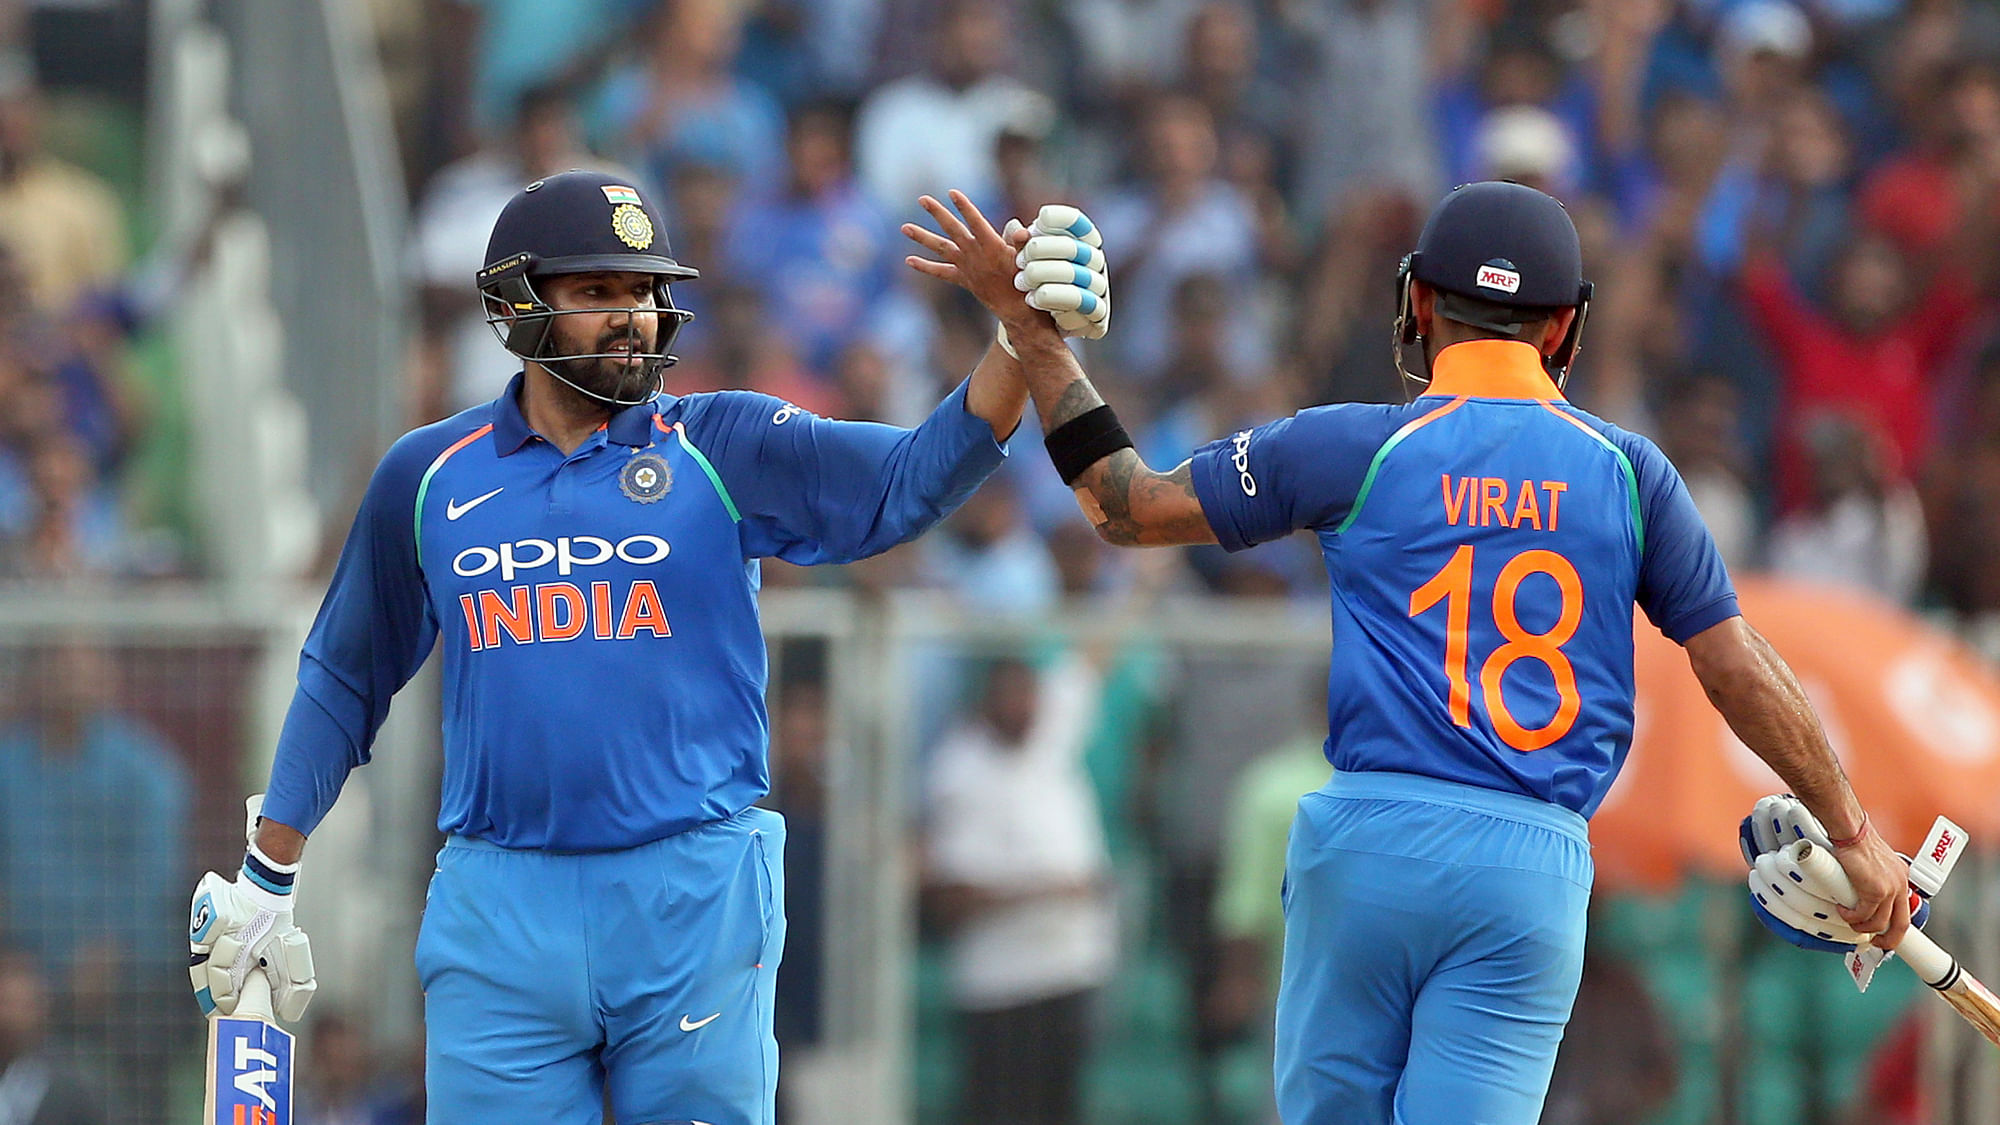 Rohit Sharma and Virat Kohli celebrate India’s victory over the Windies in the fifth ODI on Thursday.